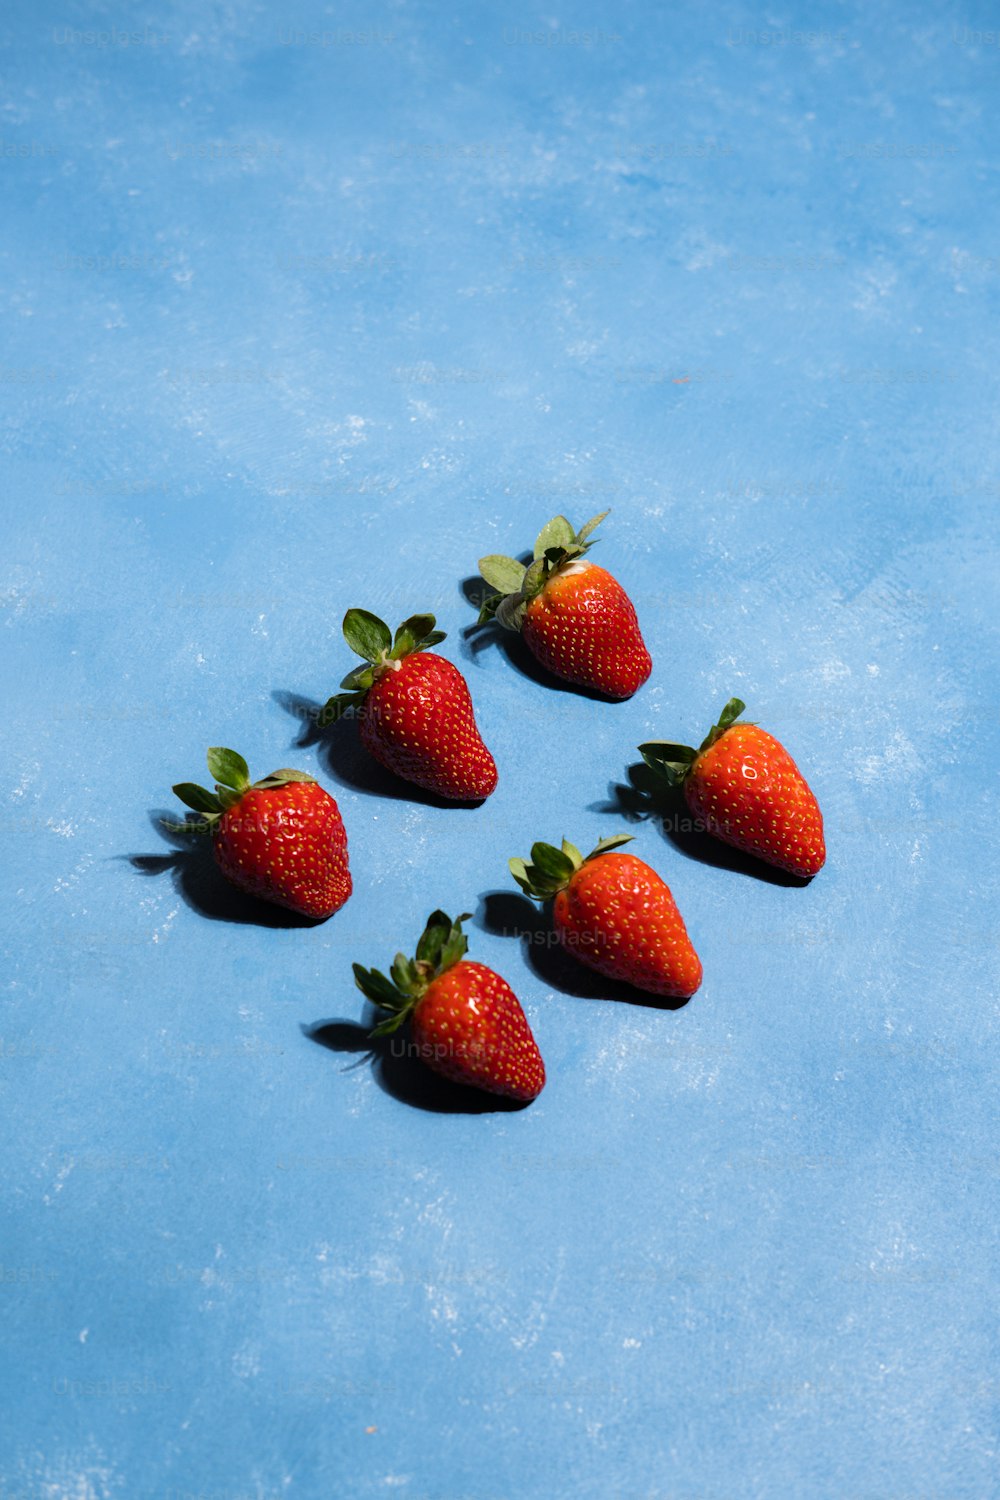 a group of five strawberries on a blue surface